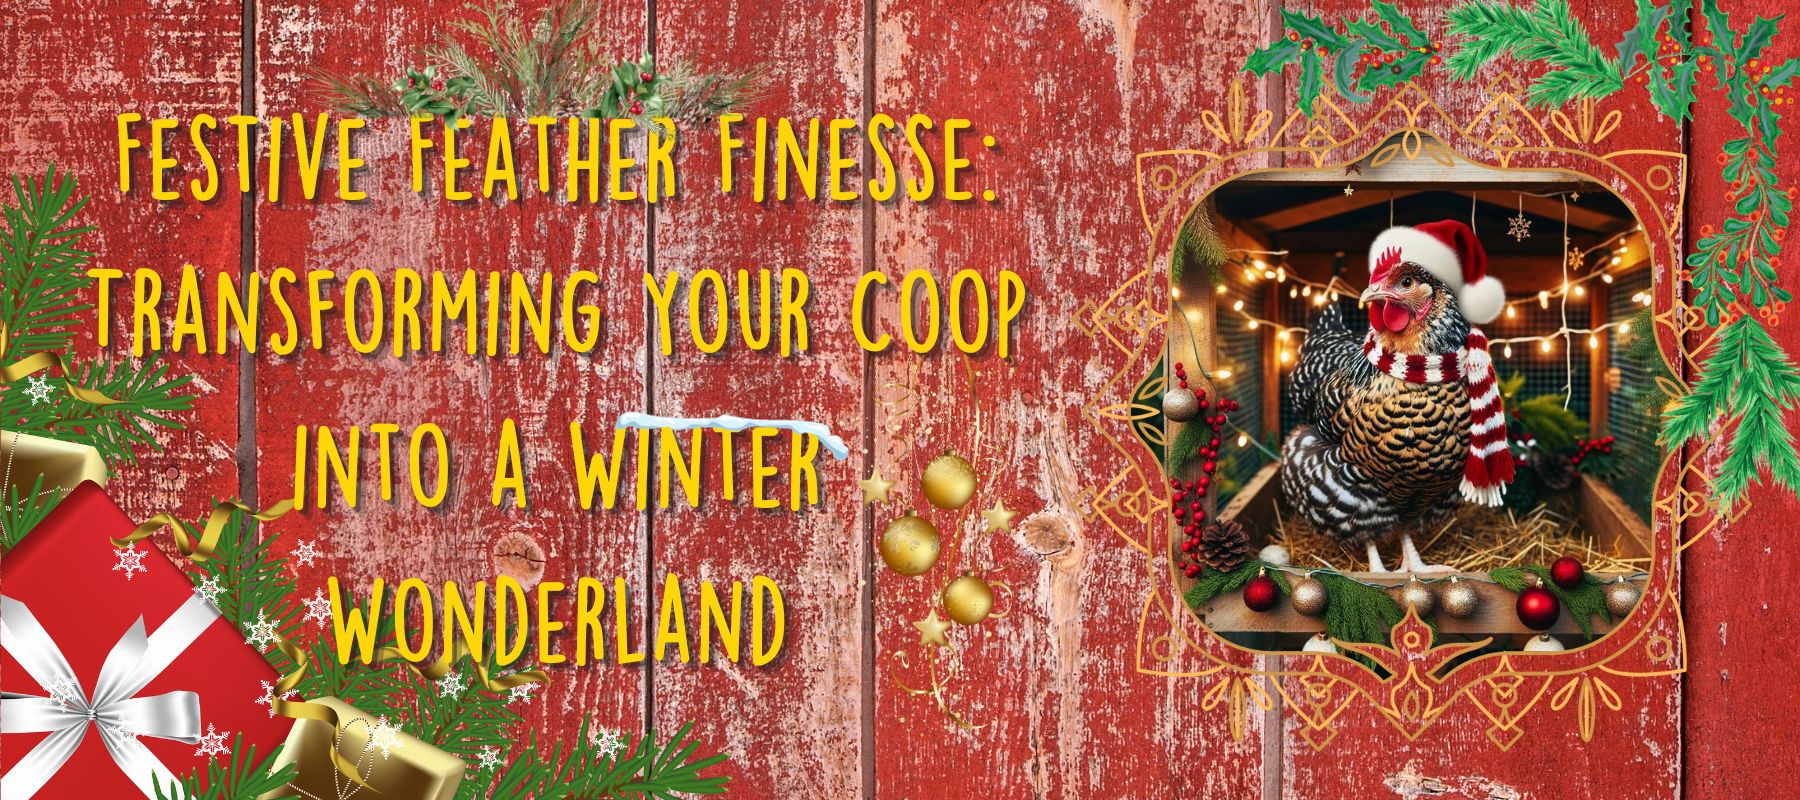 Festive Feather Finesse: Transforming Your Coop into a Winter Wonderland